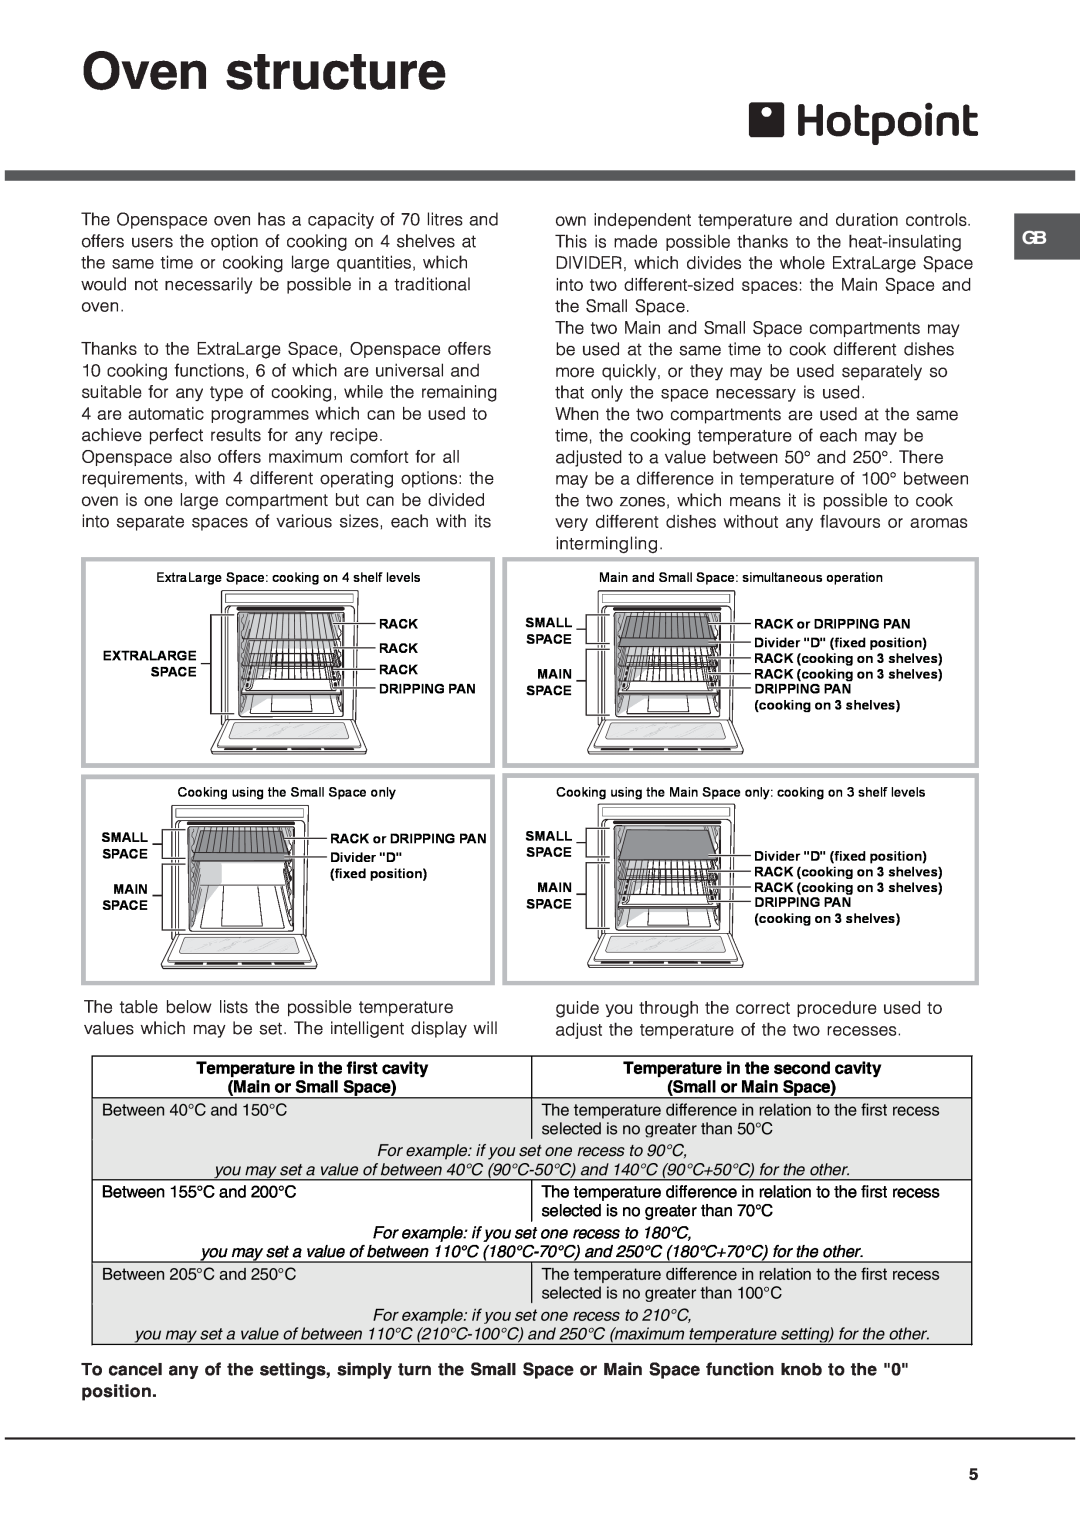 Hotpoint OS manual Oven structure 